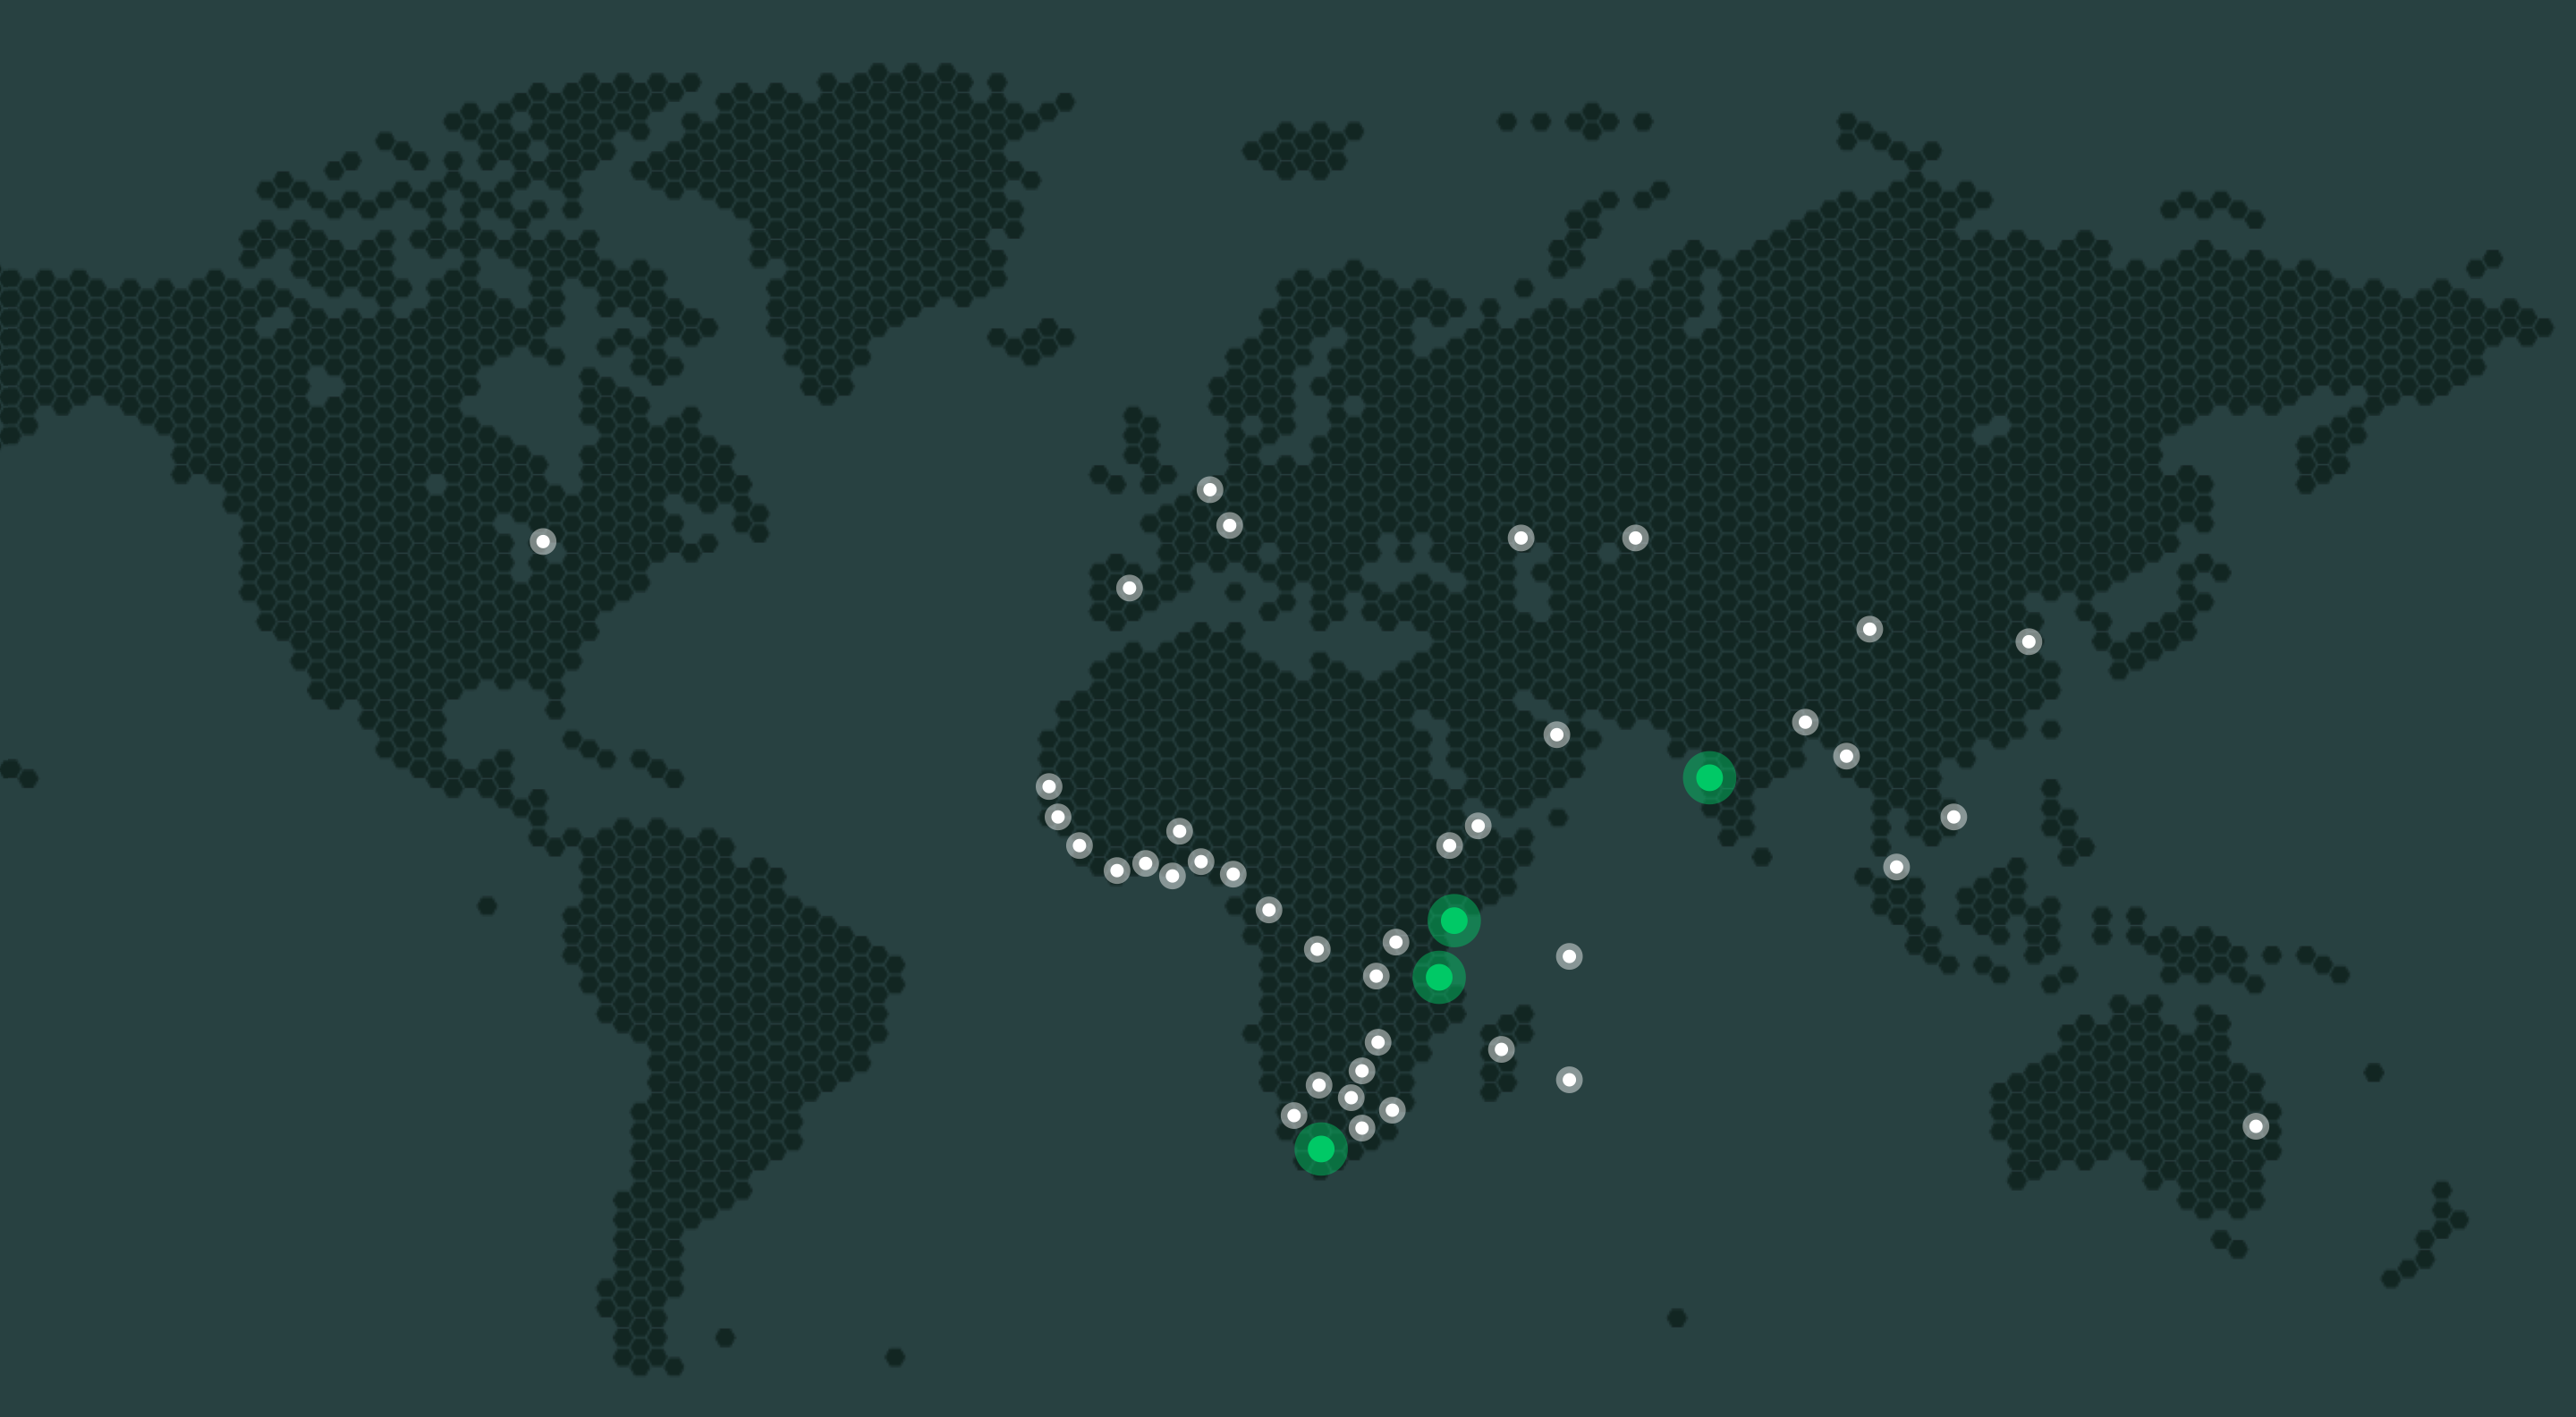 Darkened world map with large green dots showing where Greenleaf teams are located and smaller white dots showing the locations of sister company offices that Greenleaf operates out of worldwide